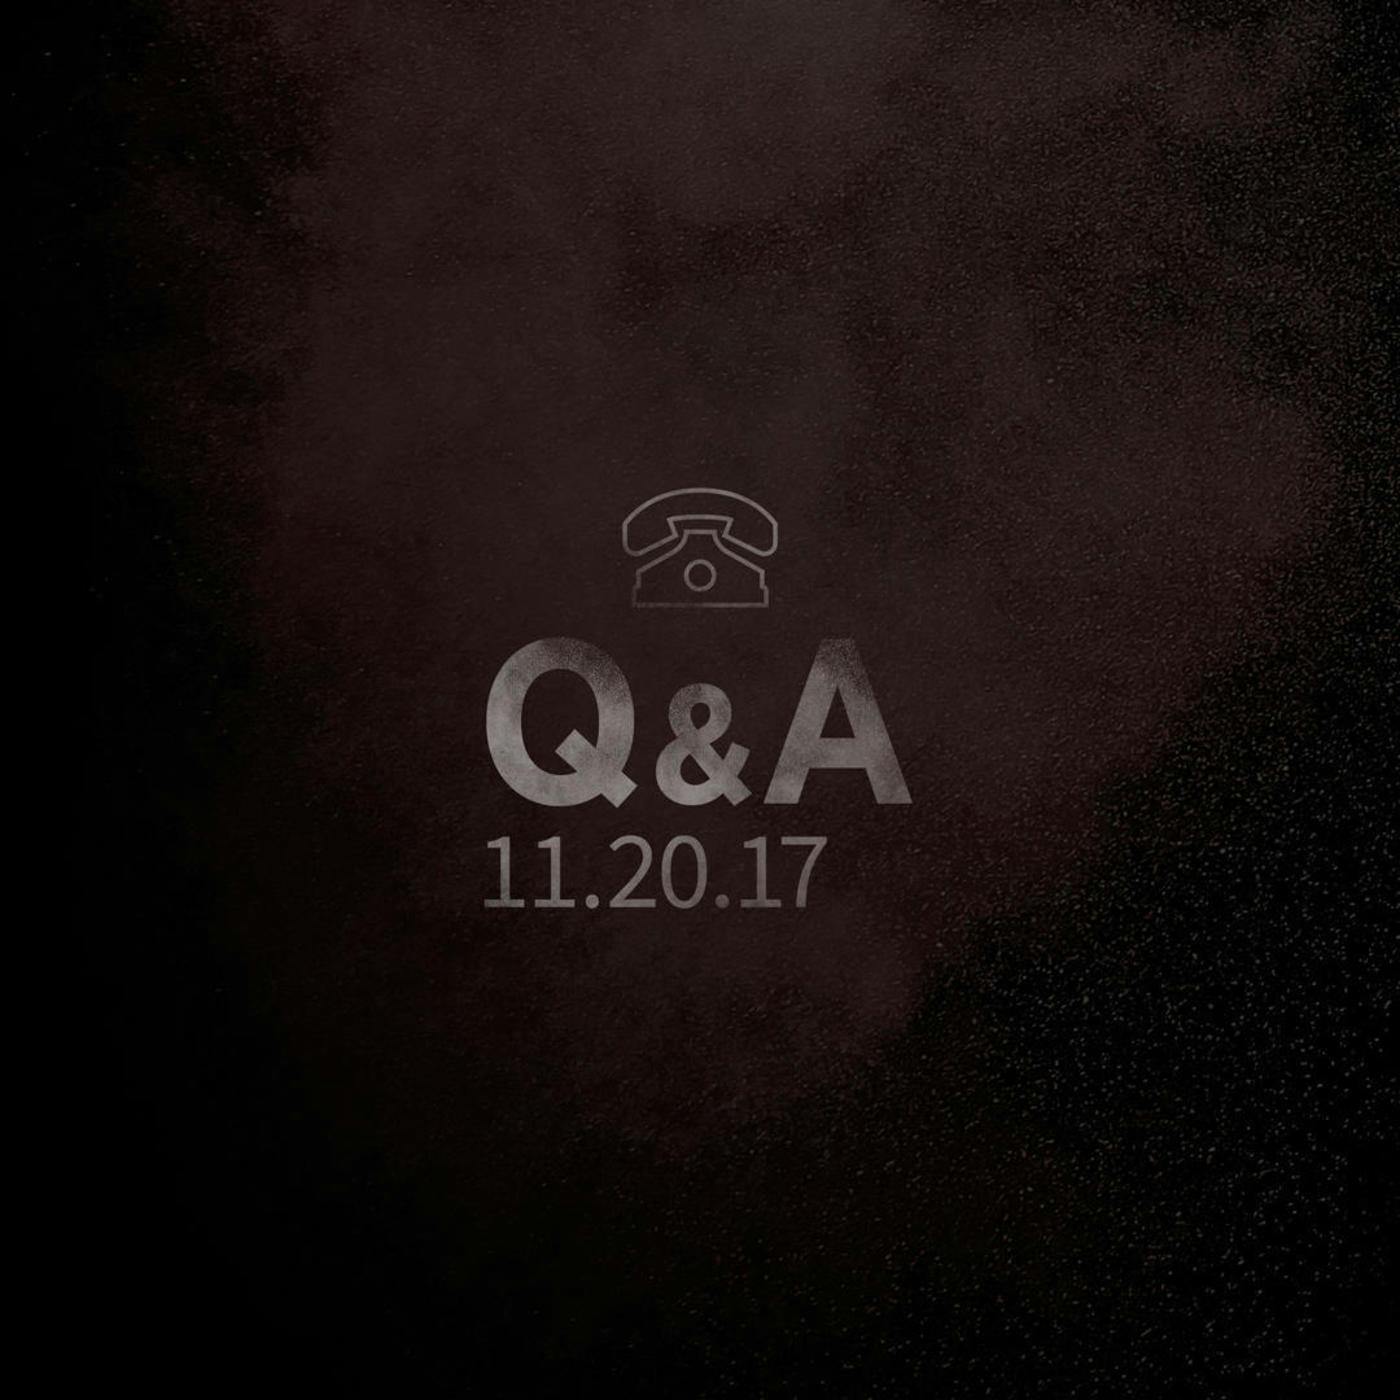 Q&A - UAV Live : 11.20.17 by Tenderfoot TV